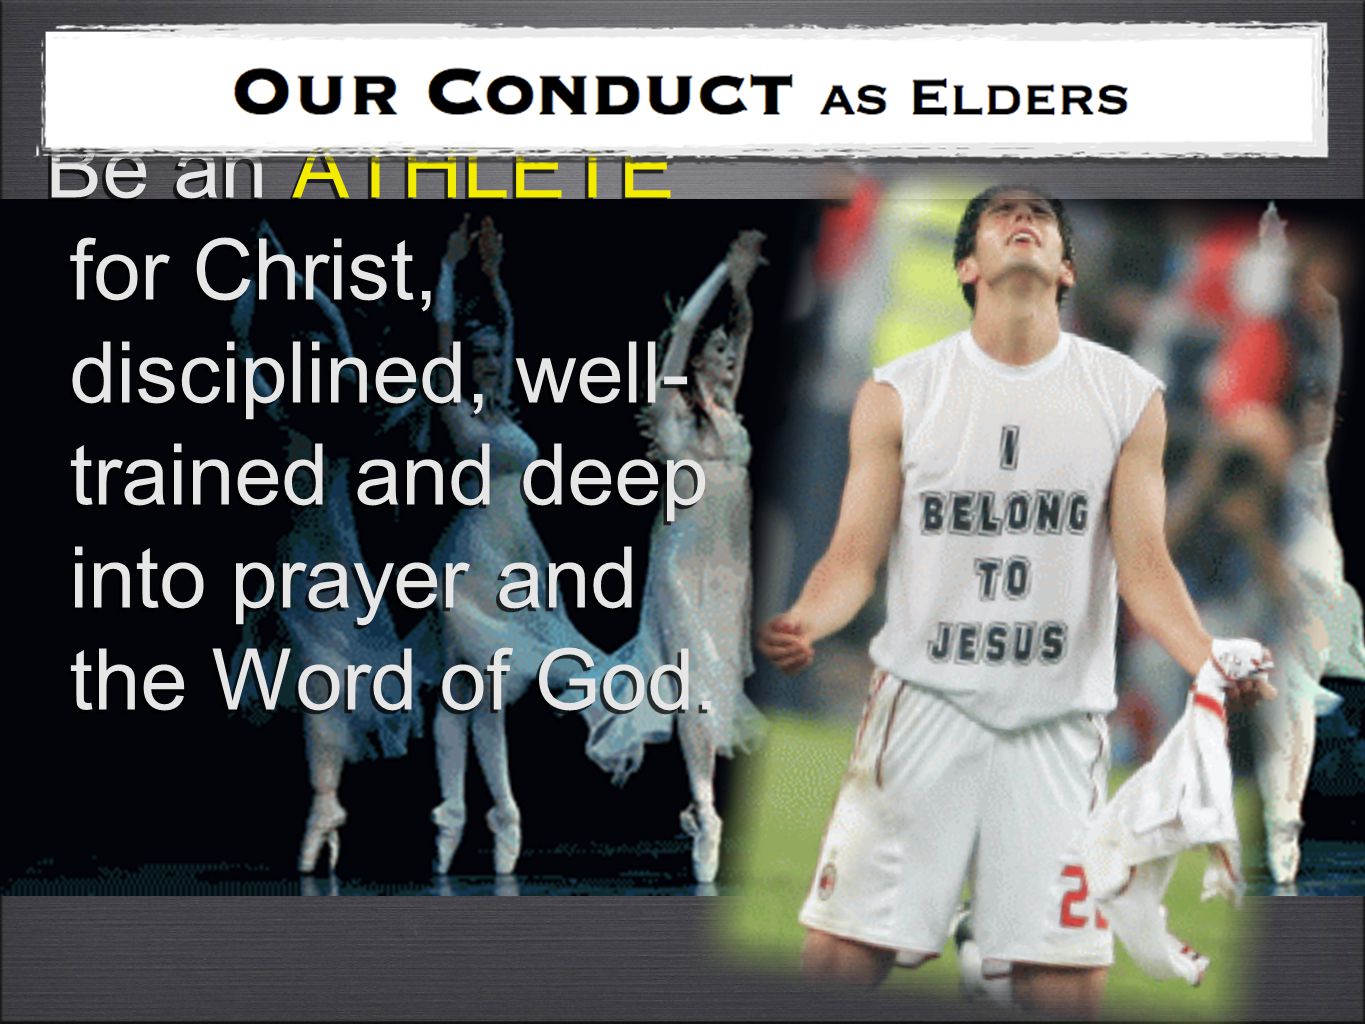 Be an ATHLETE for Christ, disciplined, well- trained and deep into prayer and the Word of God.